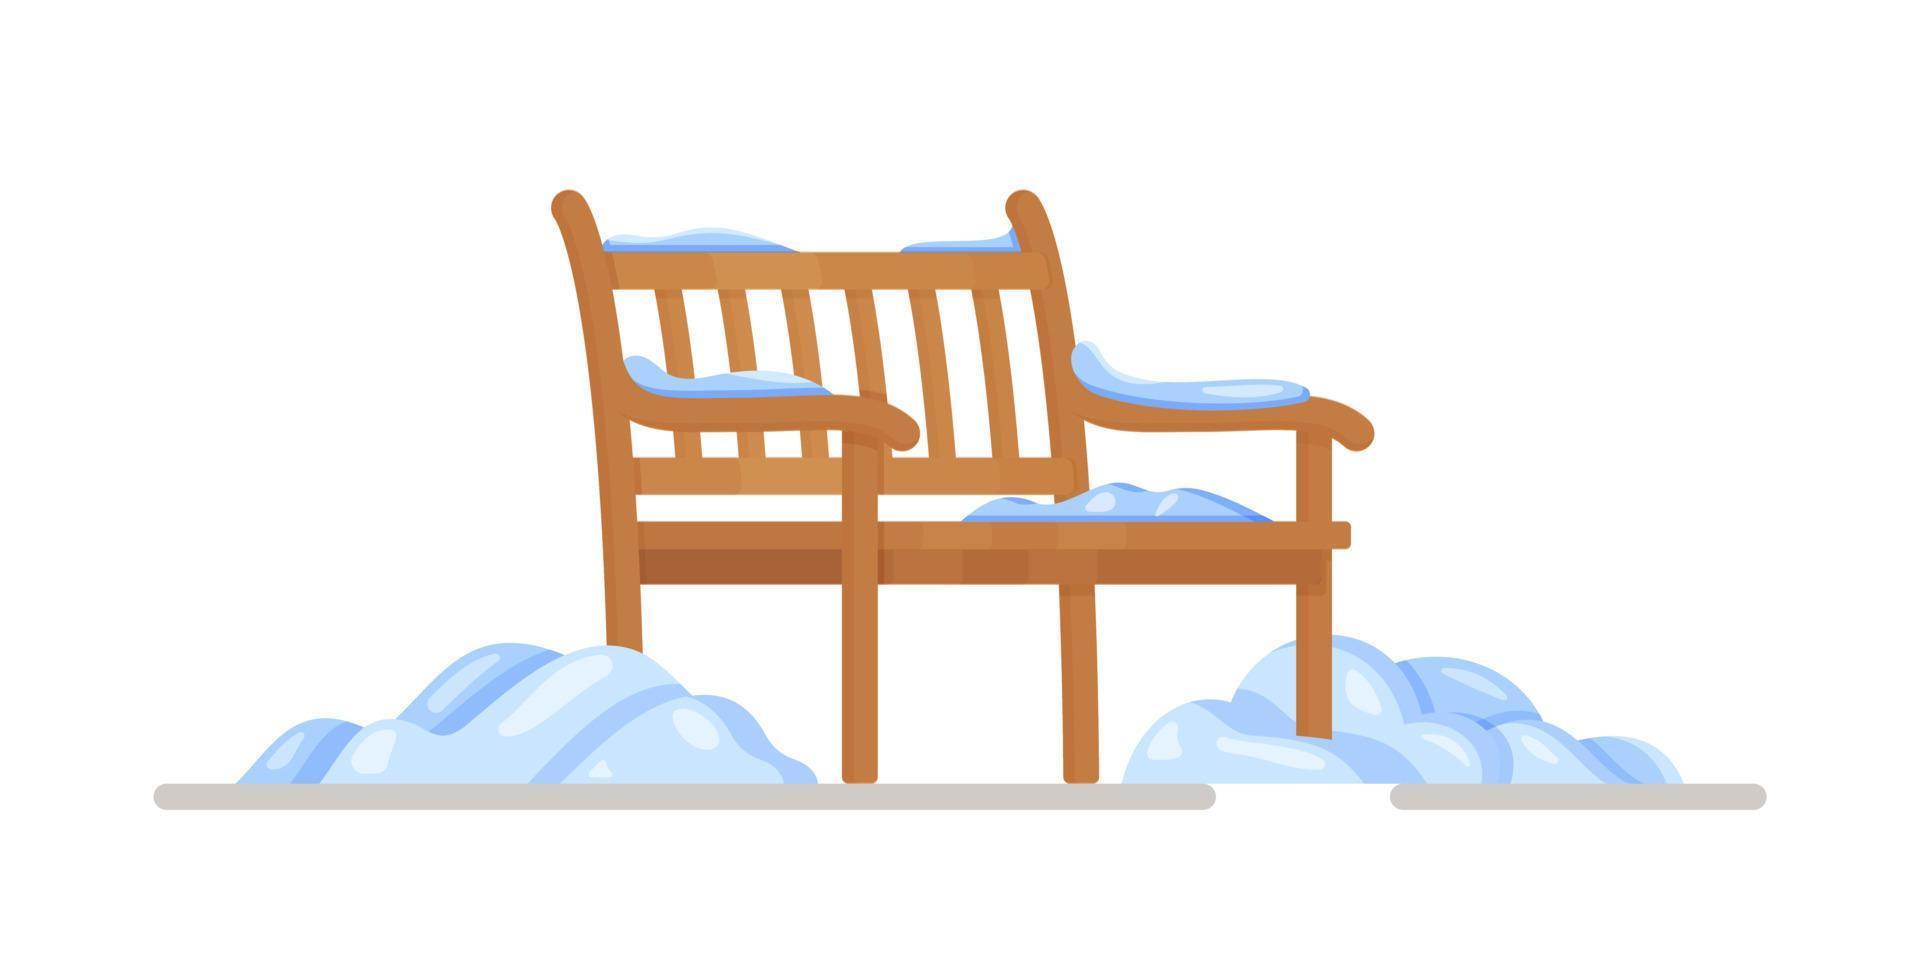 Winter atmospheric picture. Vector illustration of the winter bench.